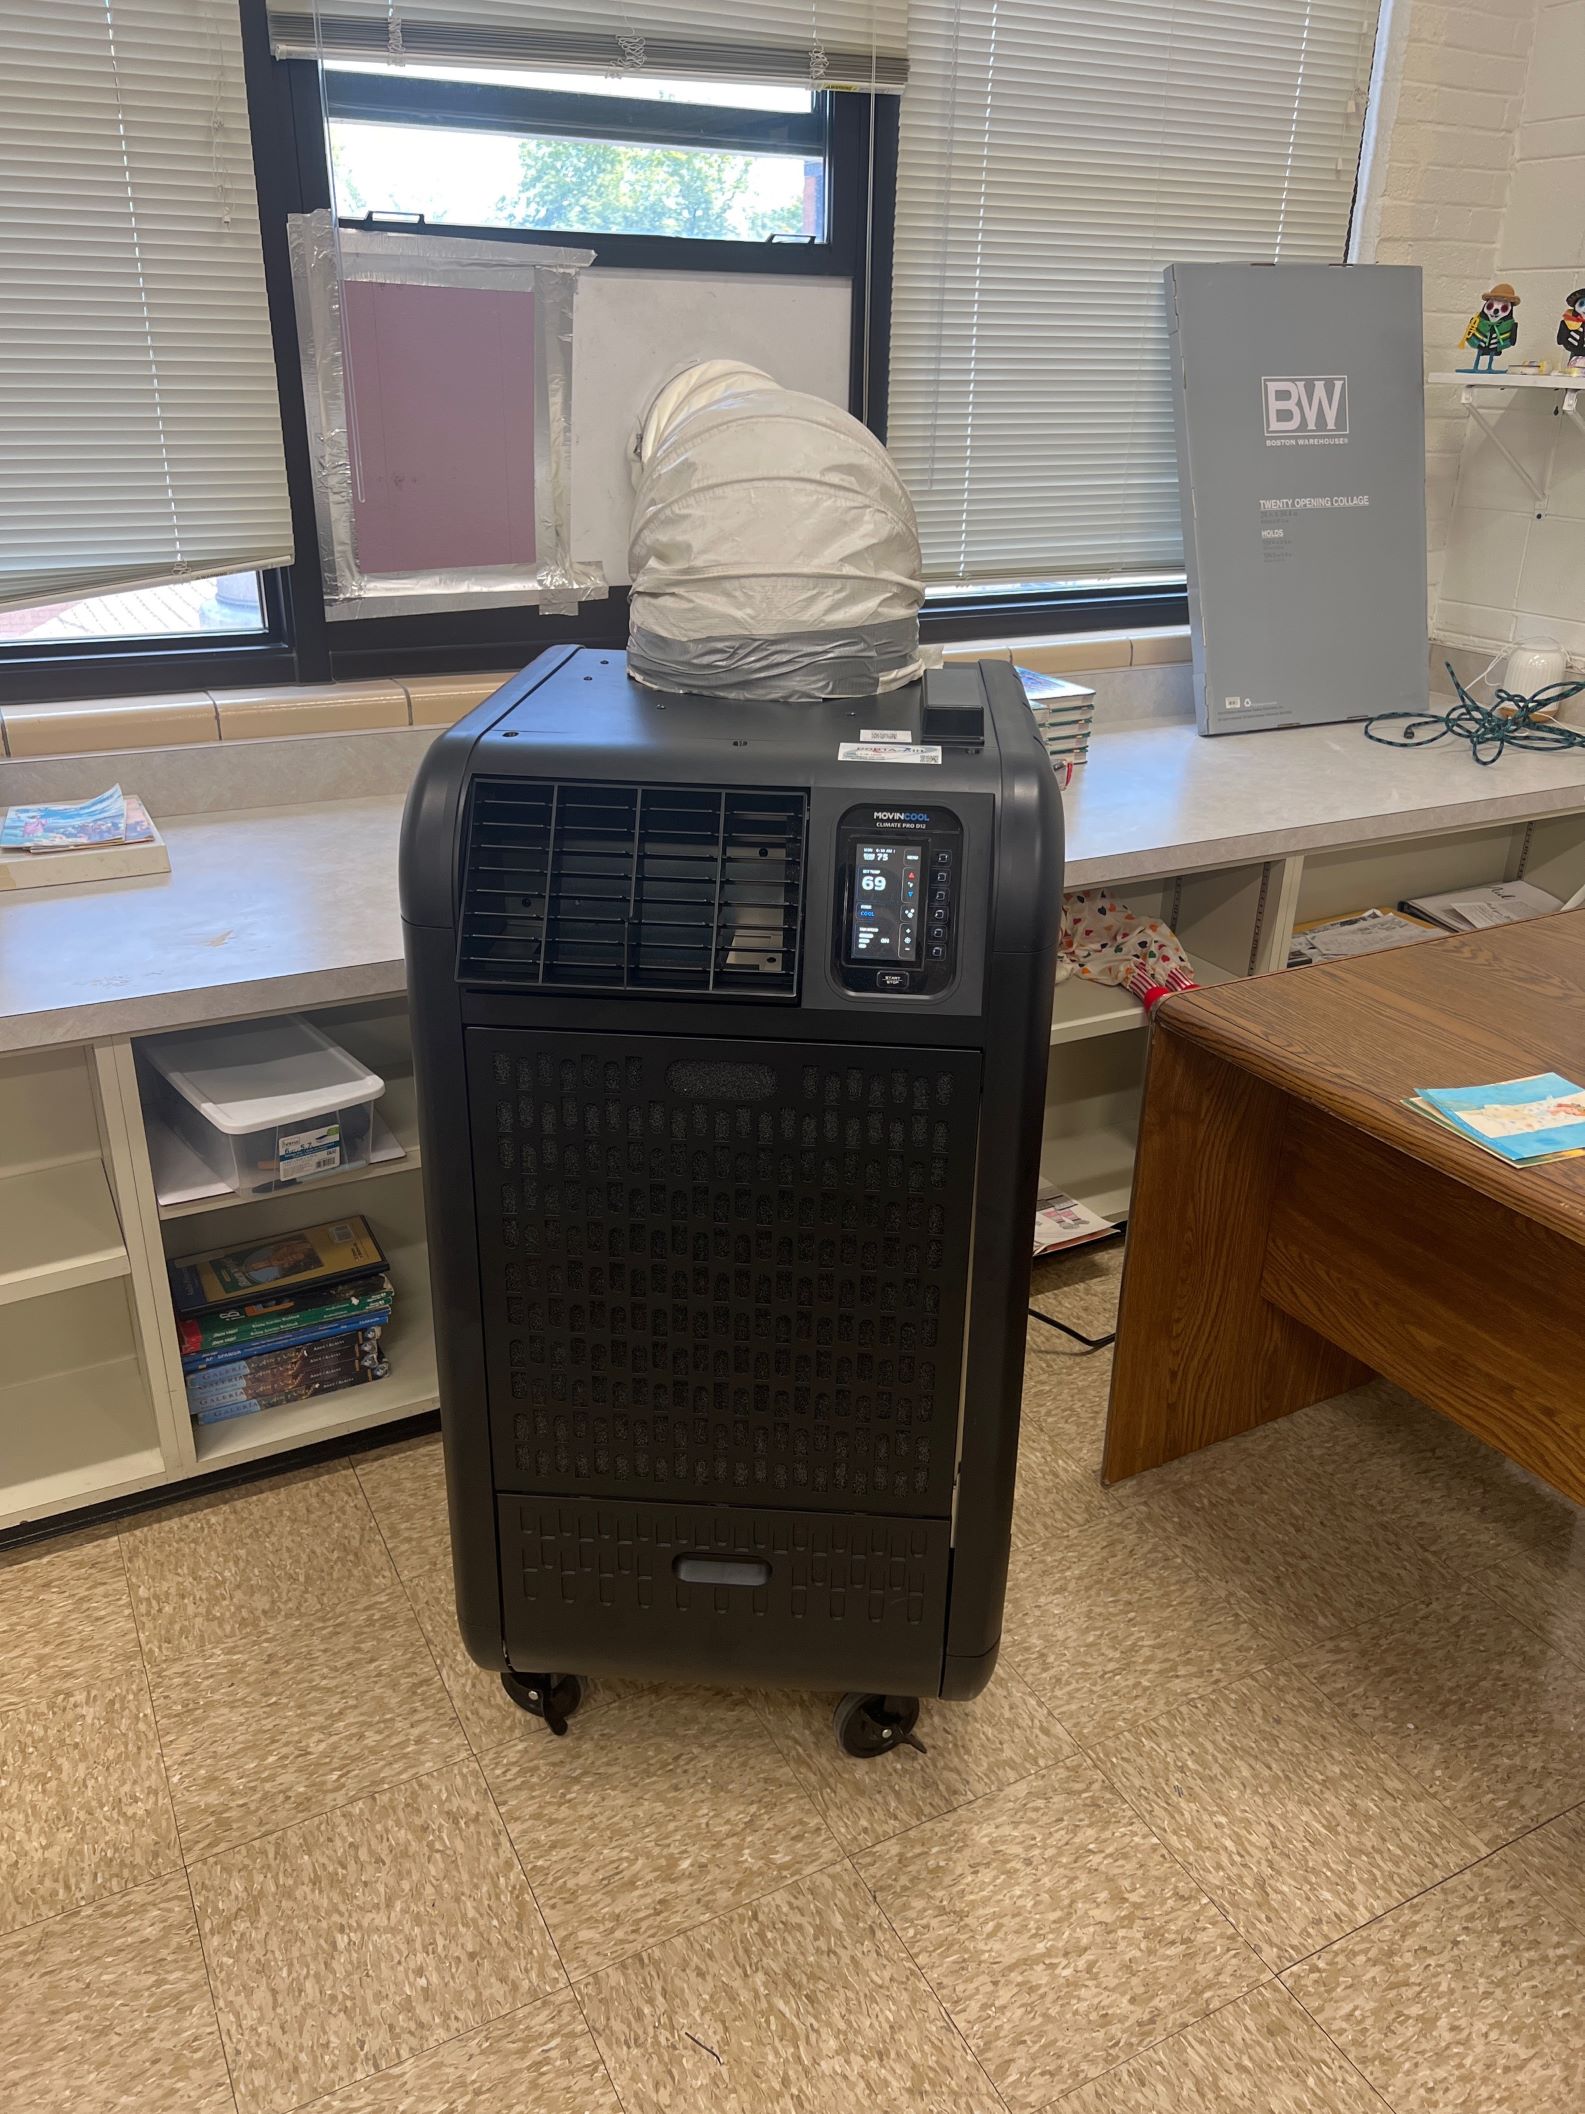 Black upright temporary HP unit in a school classroom cooling the area.  